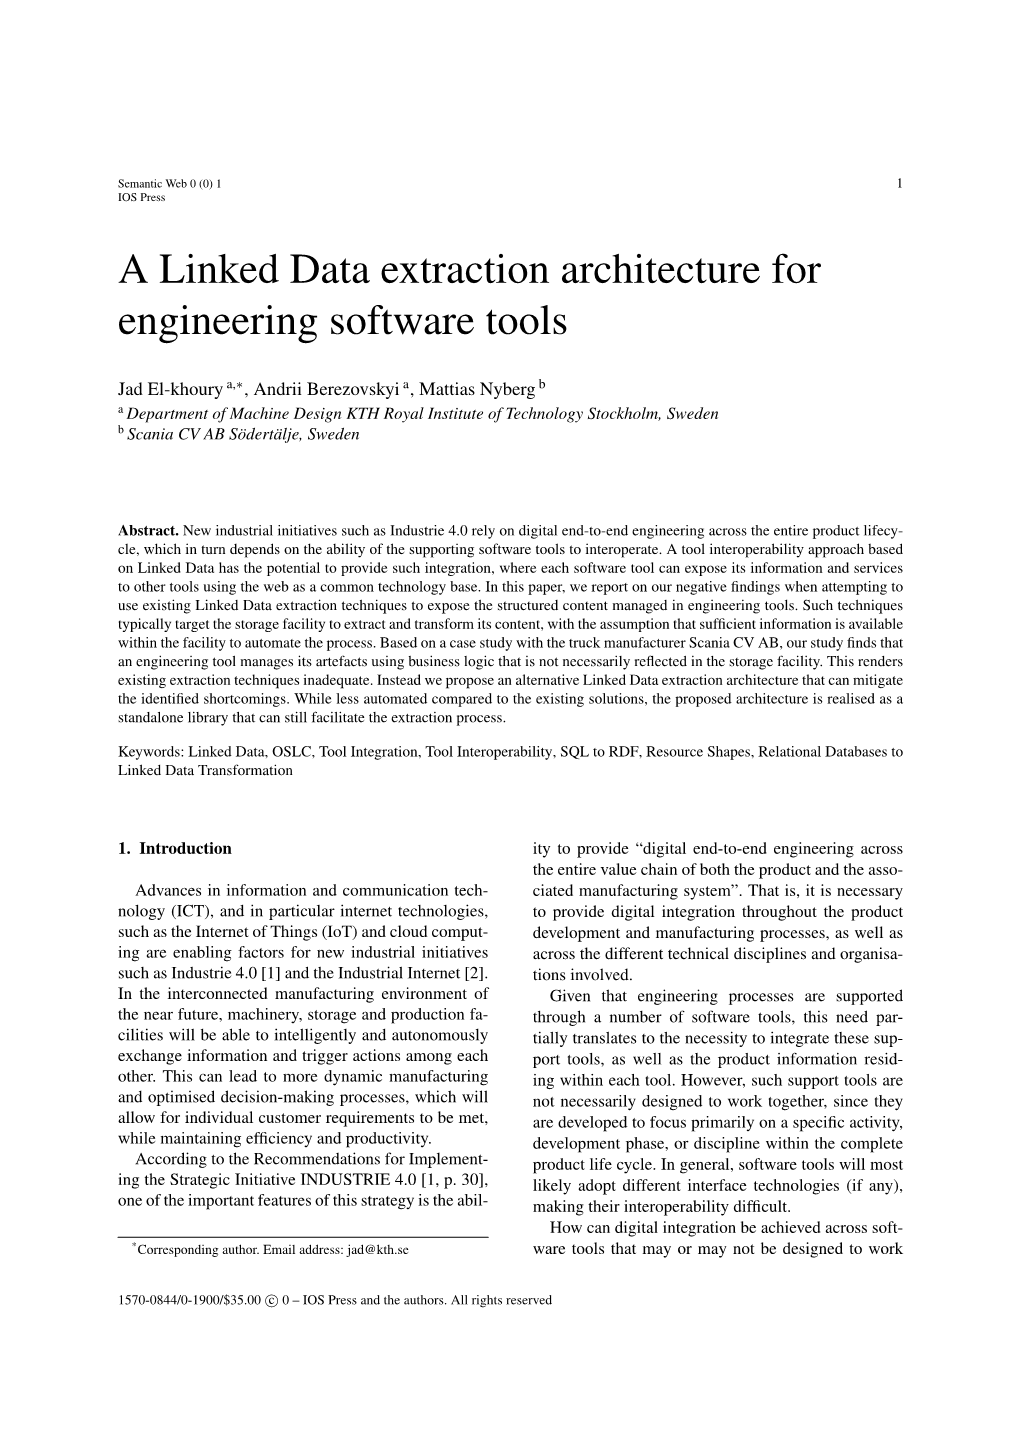 A Linked Data Extraction Architecture for Engineering Software Tools